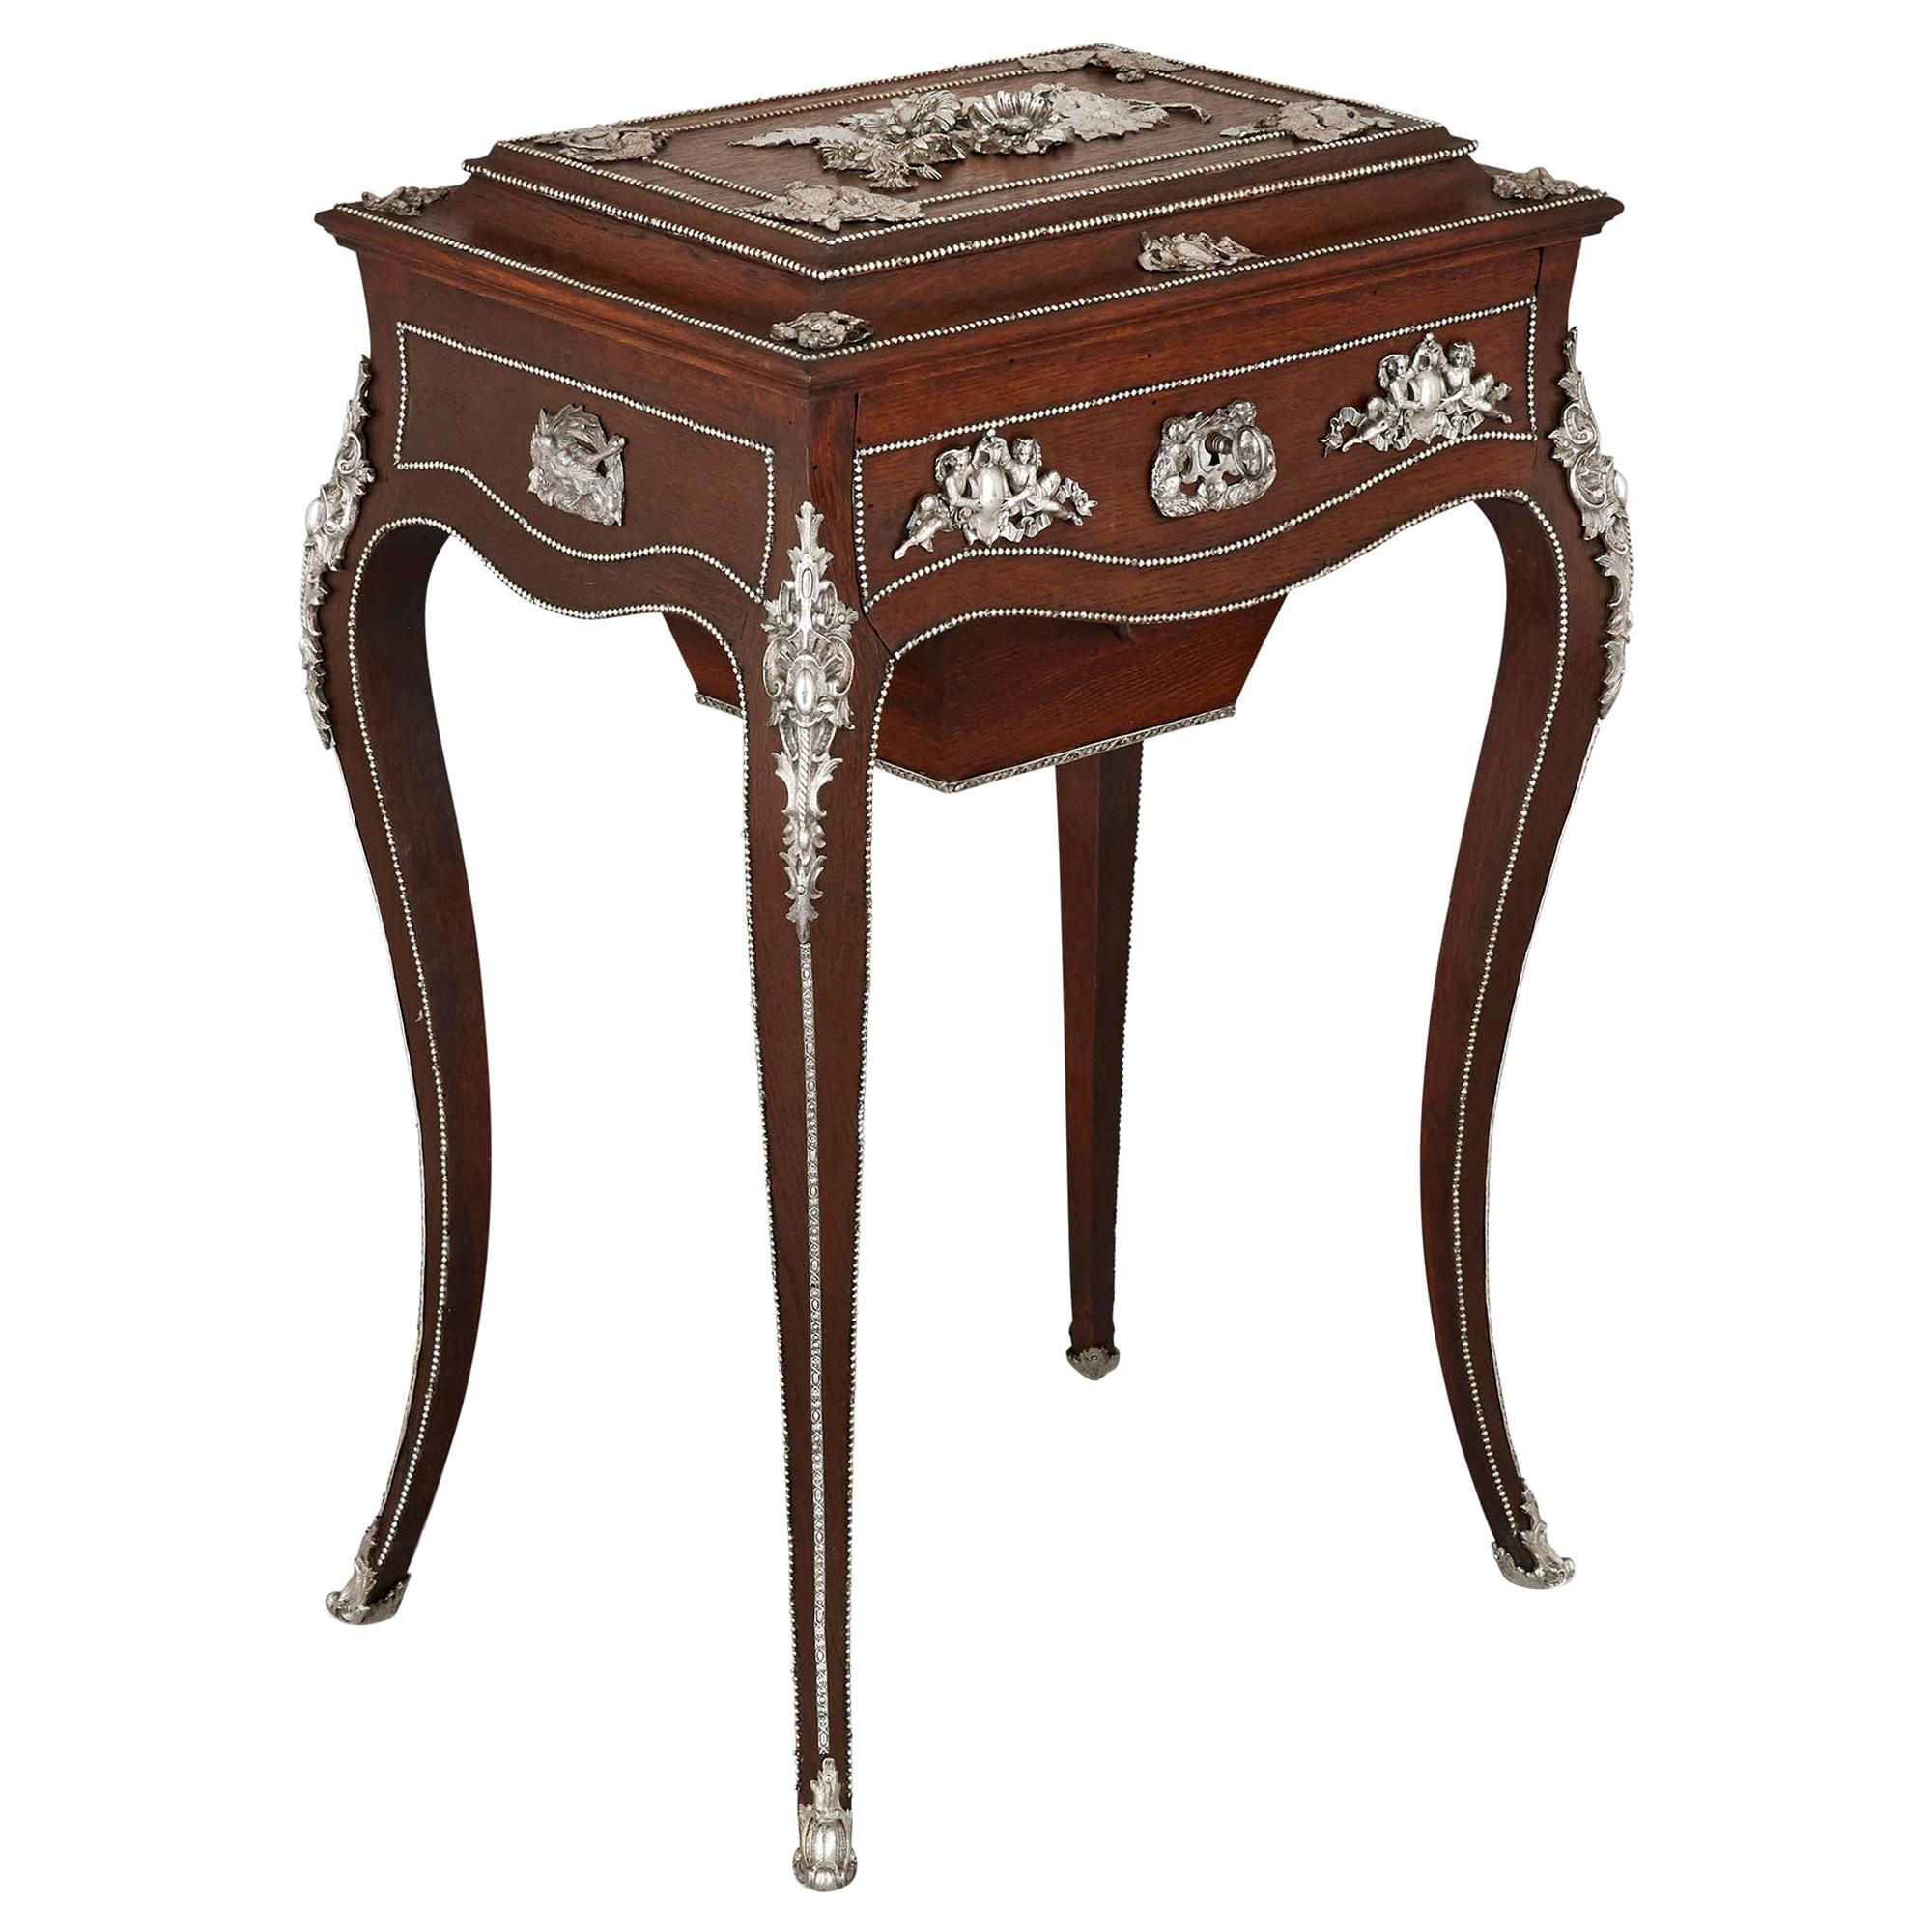 Napoleon III Period Dressing Table, Attributed to Diehl